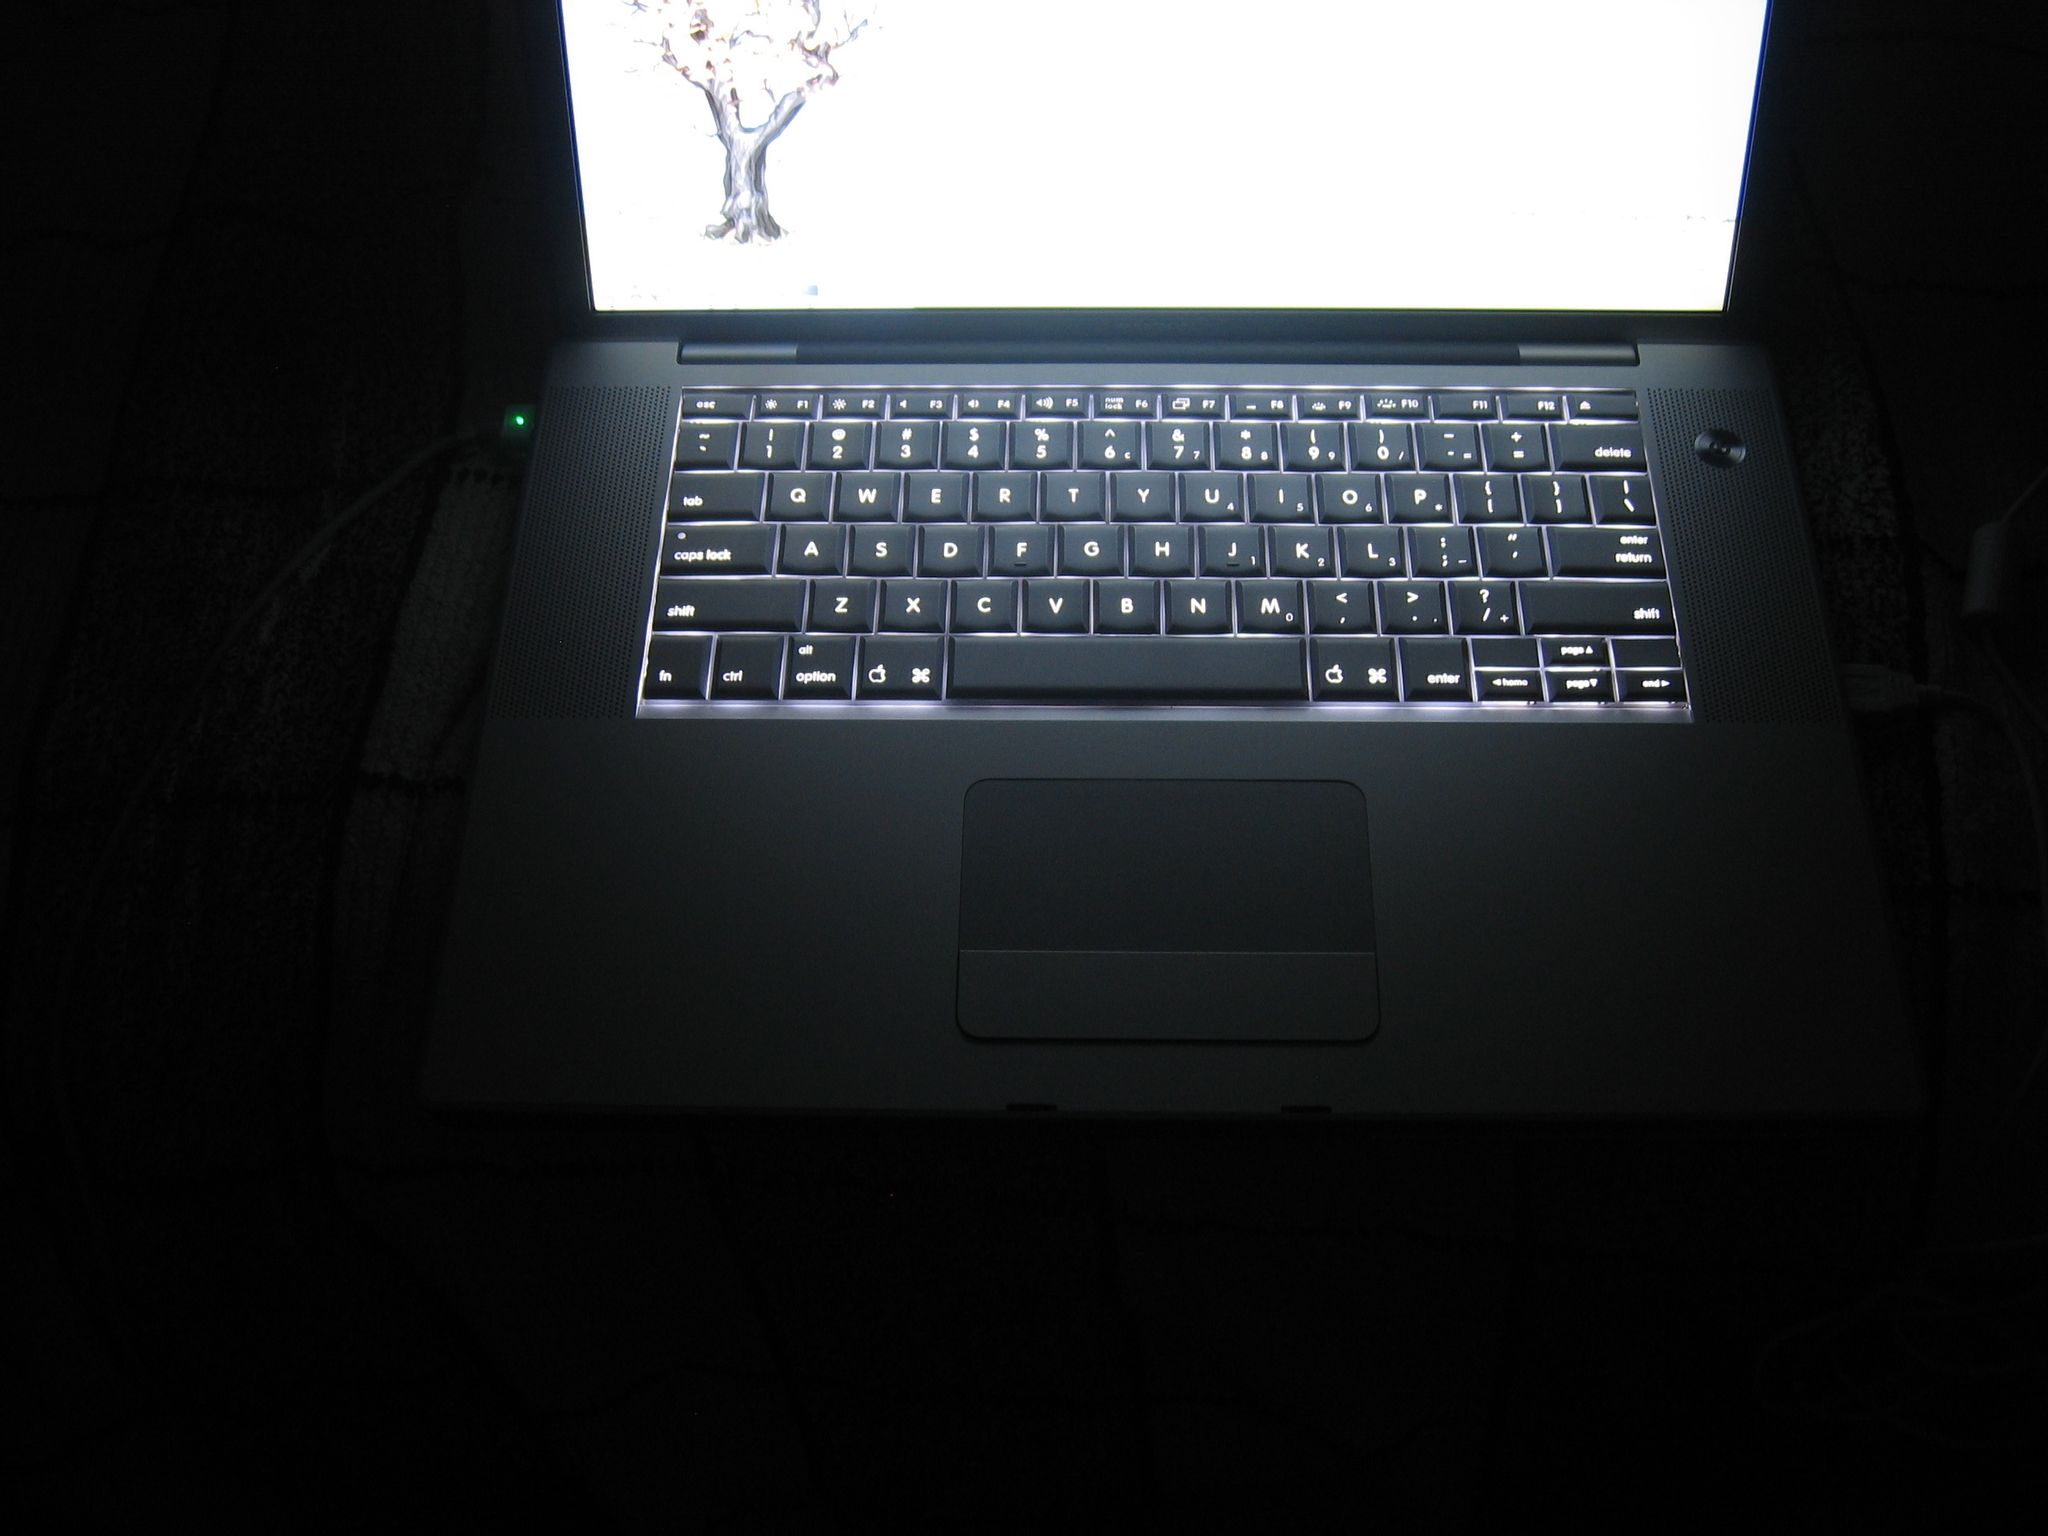 A photo of the keyboard of a MacBook Pro taken in the dark showing off the backlit keyboard.